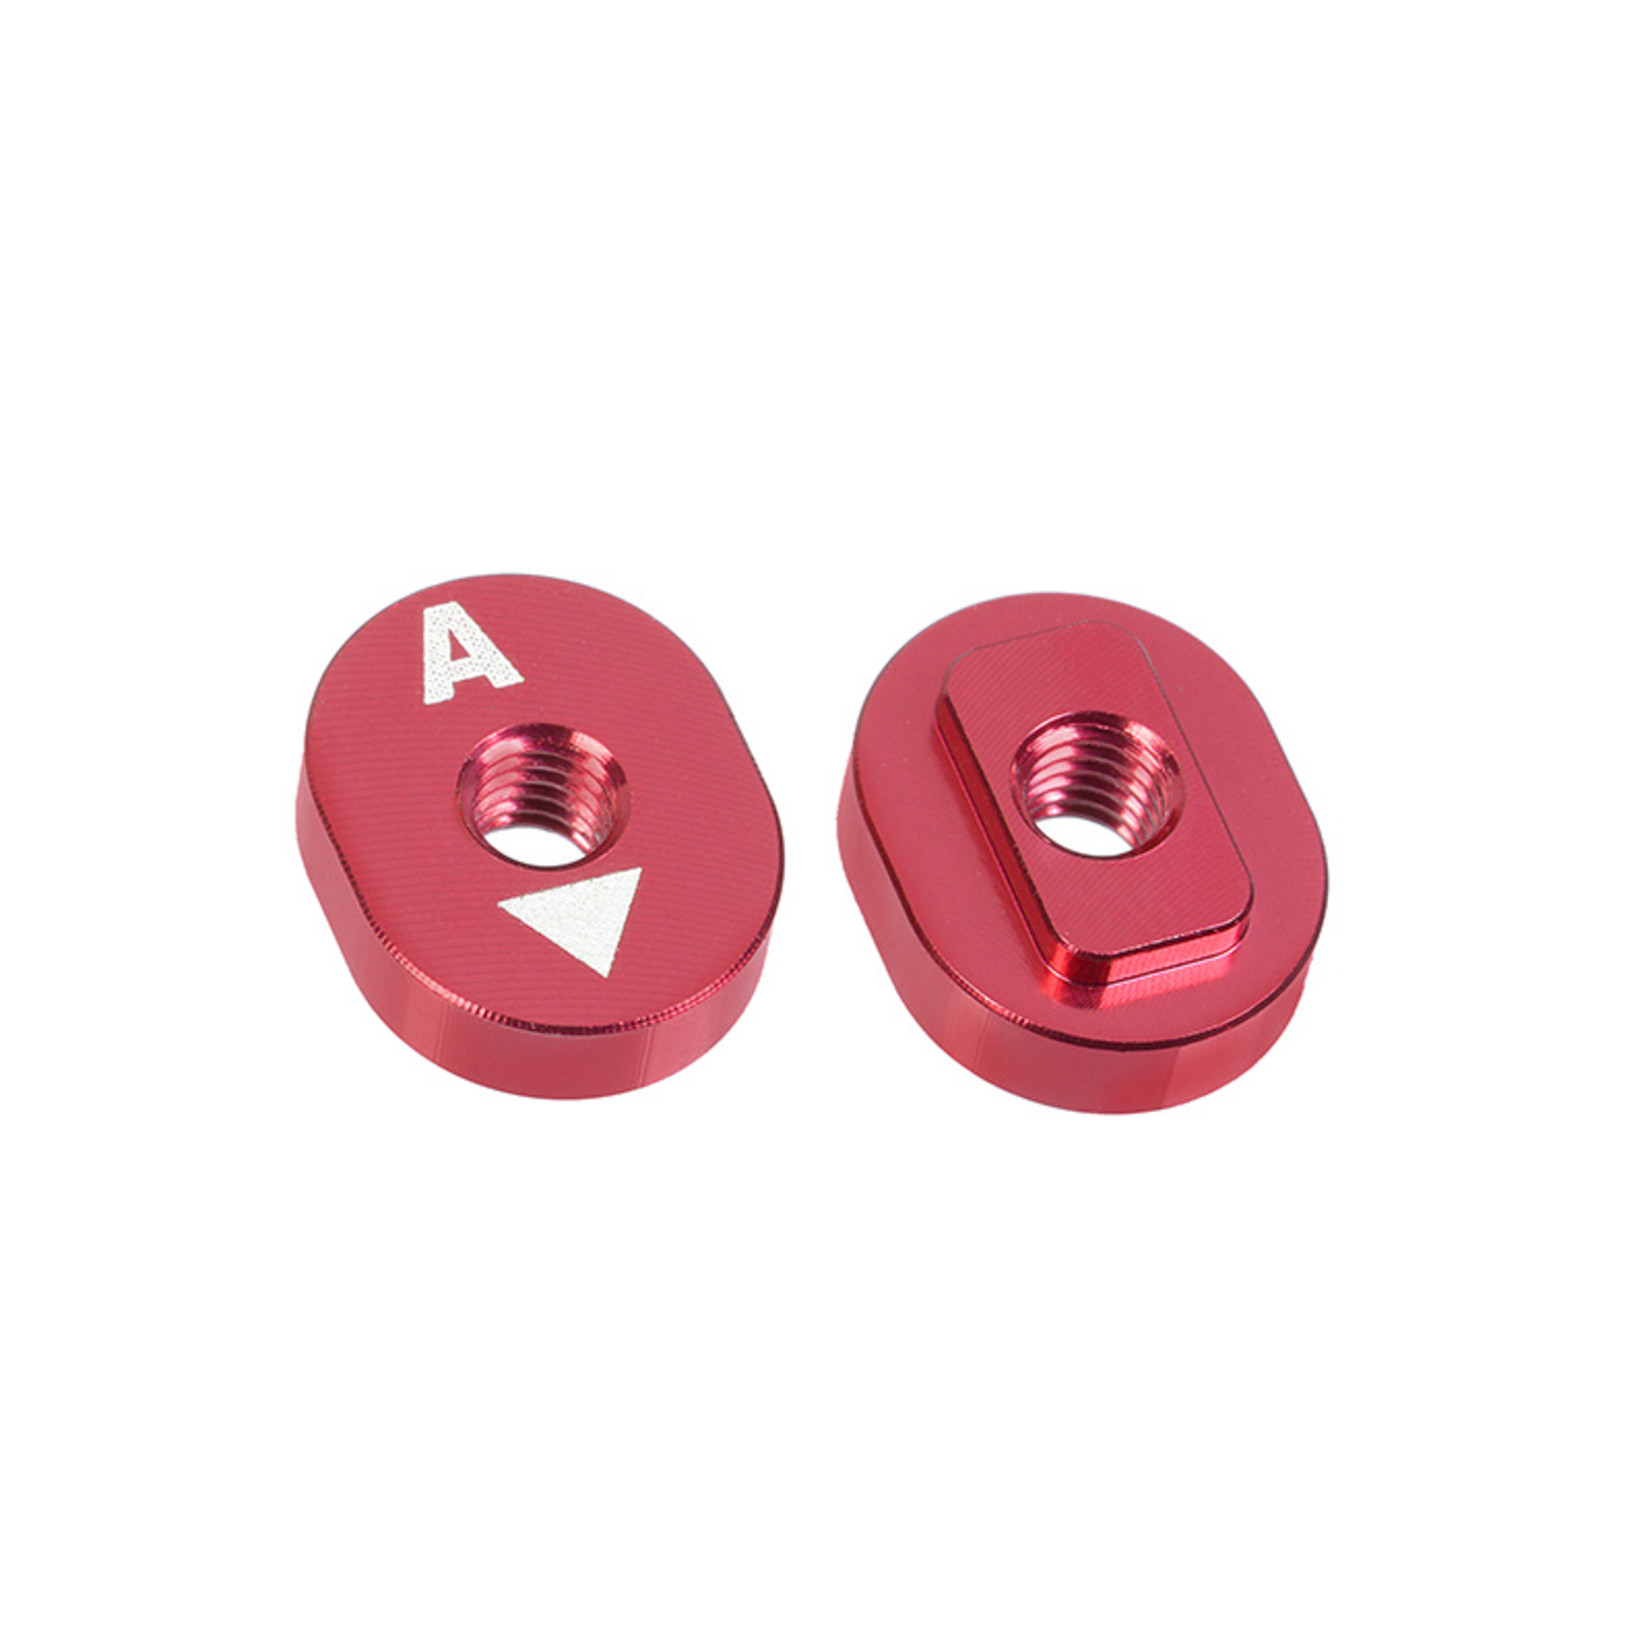 Corally (Team Corally) Aluminum Eccentric Camber Nut - A - 1 Degree - 2 pcs